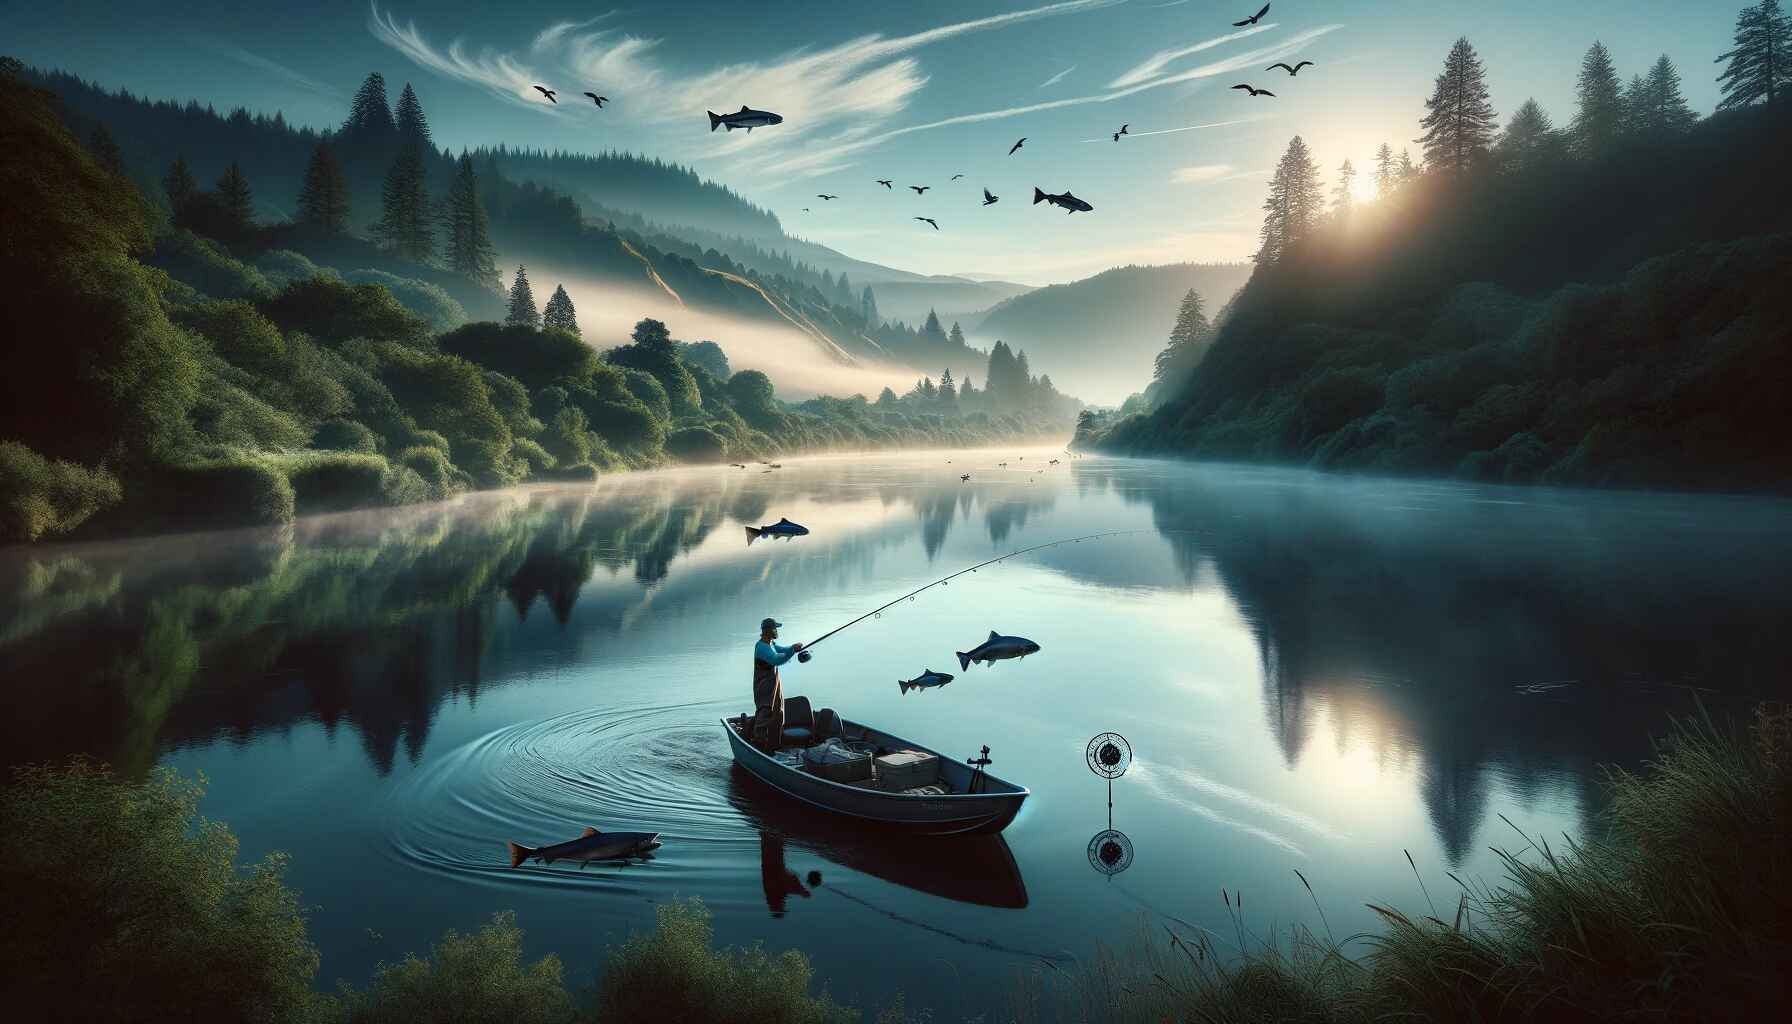 An early morning scene on the Willamette River features a fisherman in a boat casting a line into the calm waters, surrounded by lush greenery and distant hills shrouded in mist, with birds flying low, reflecting the tranquility of fishing for steelhead.